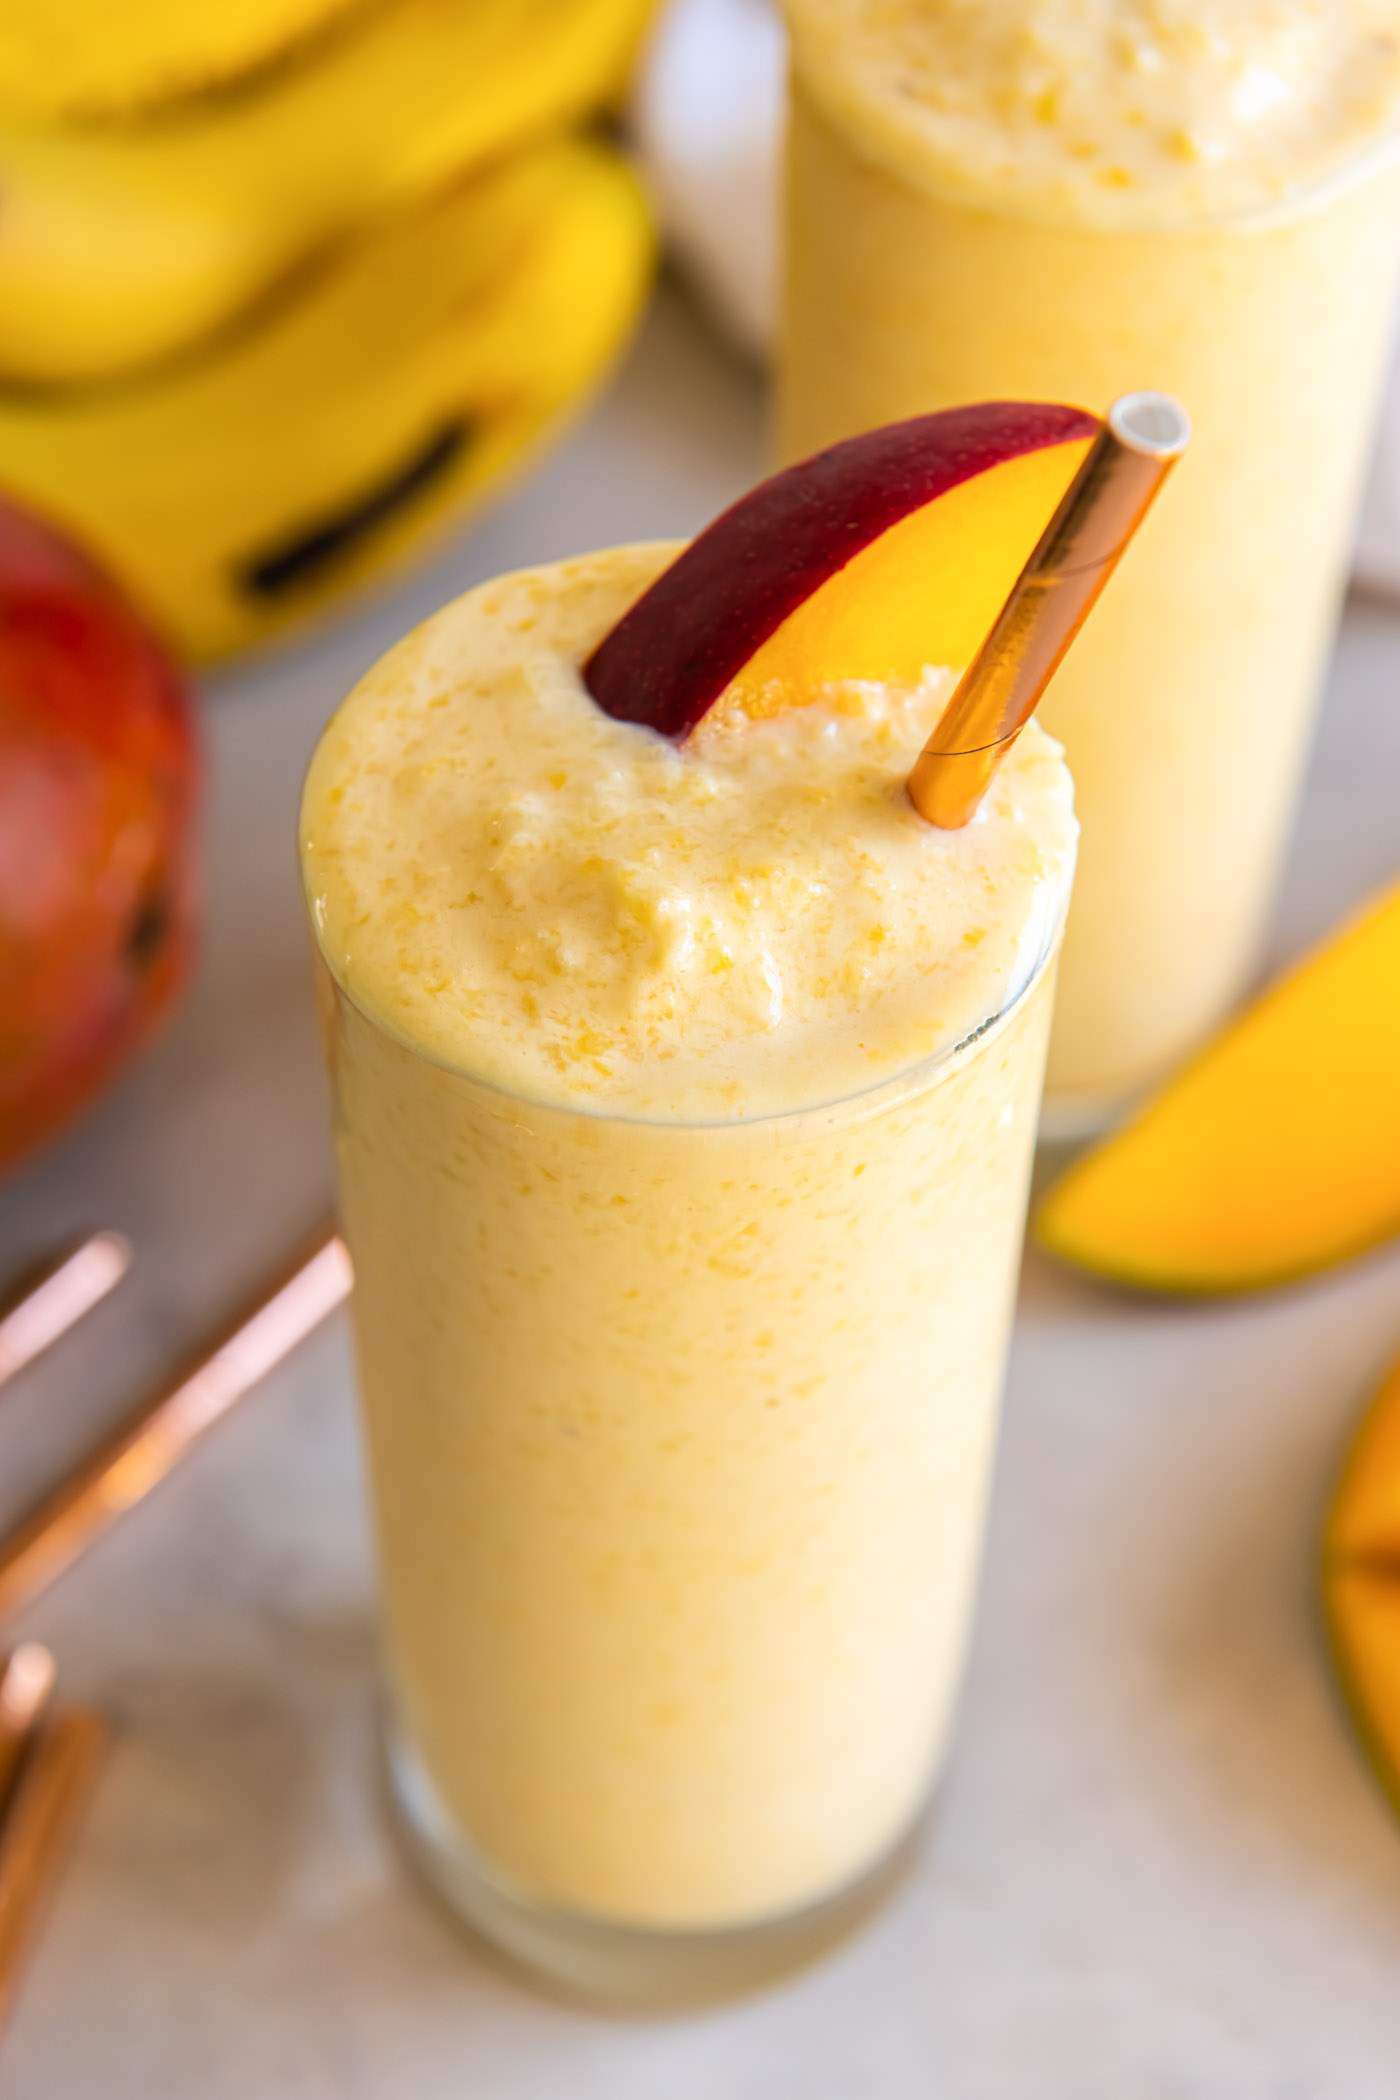 Mango smoothie in a glass with a mango slice and a gold straw.